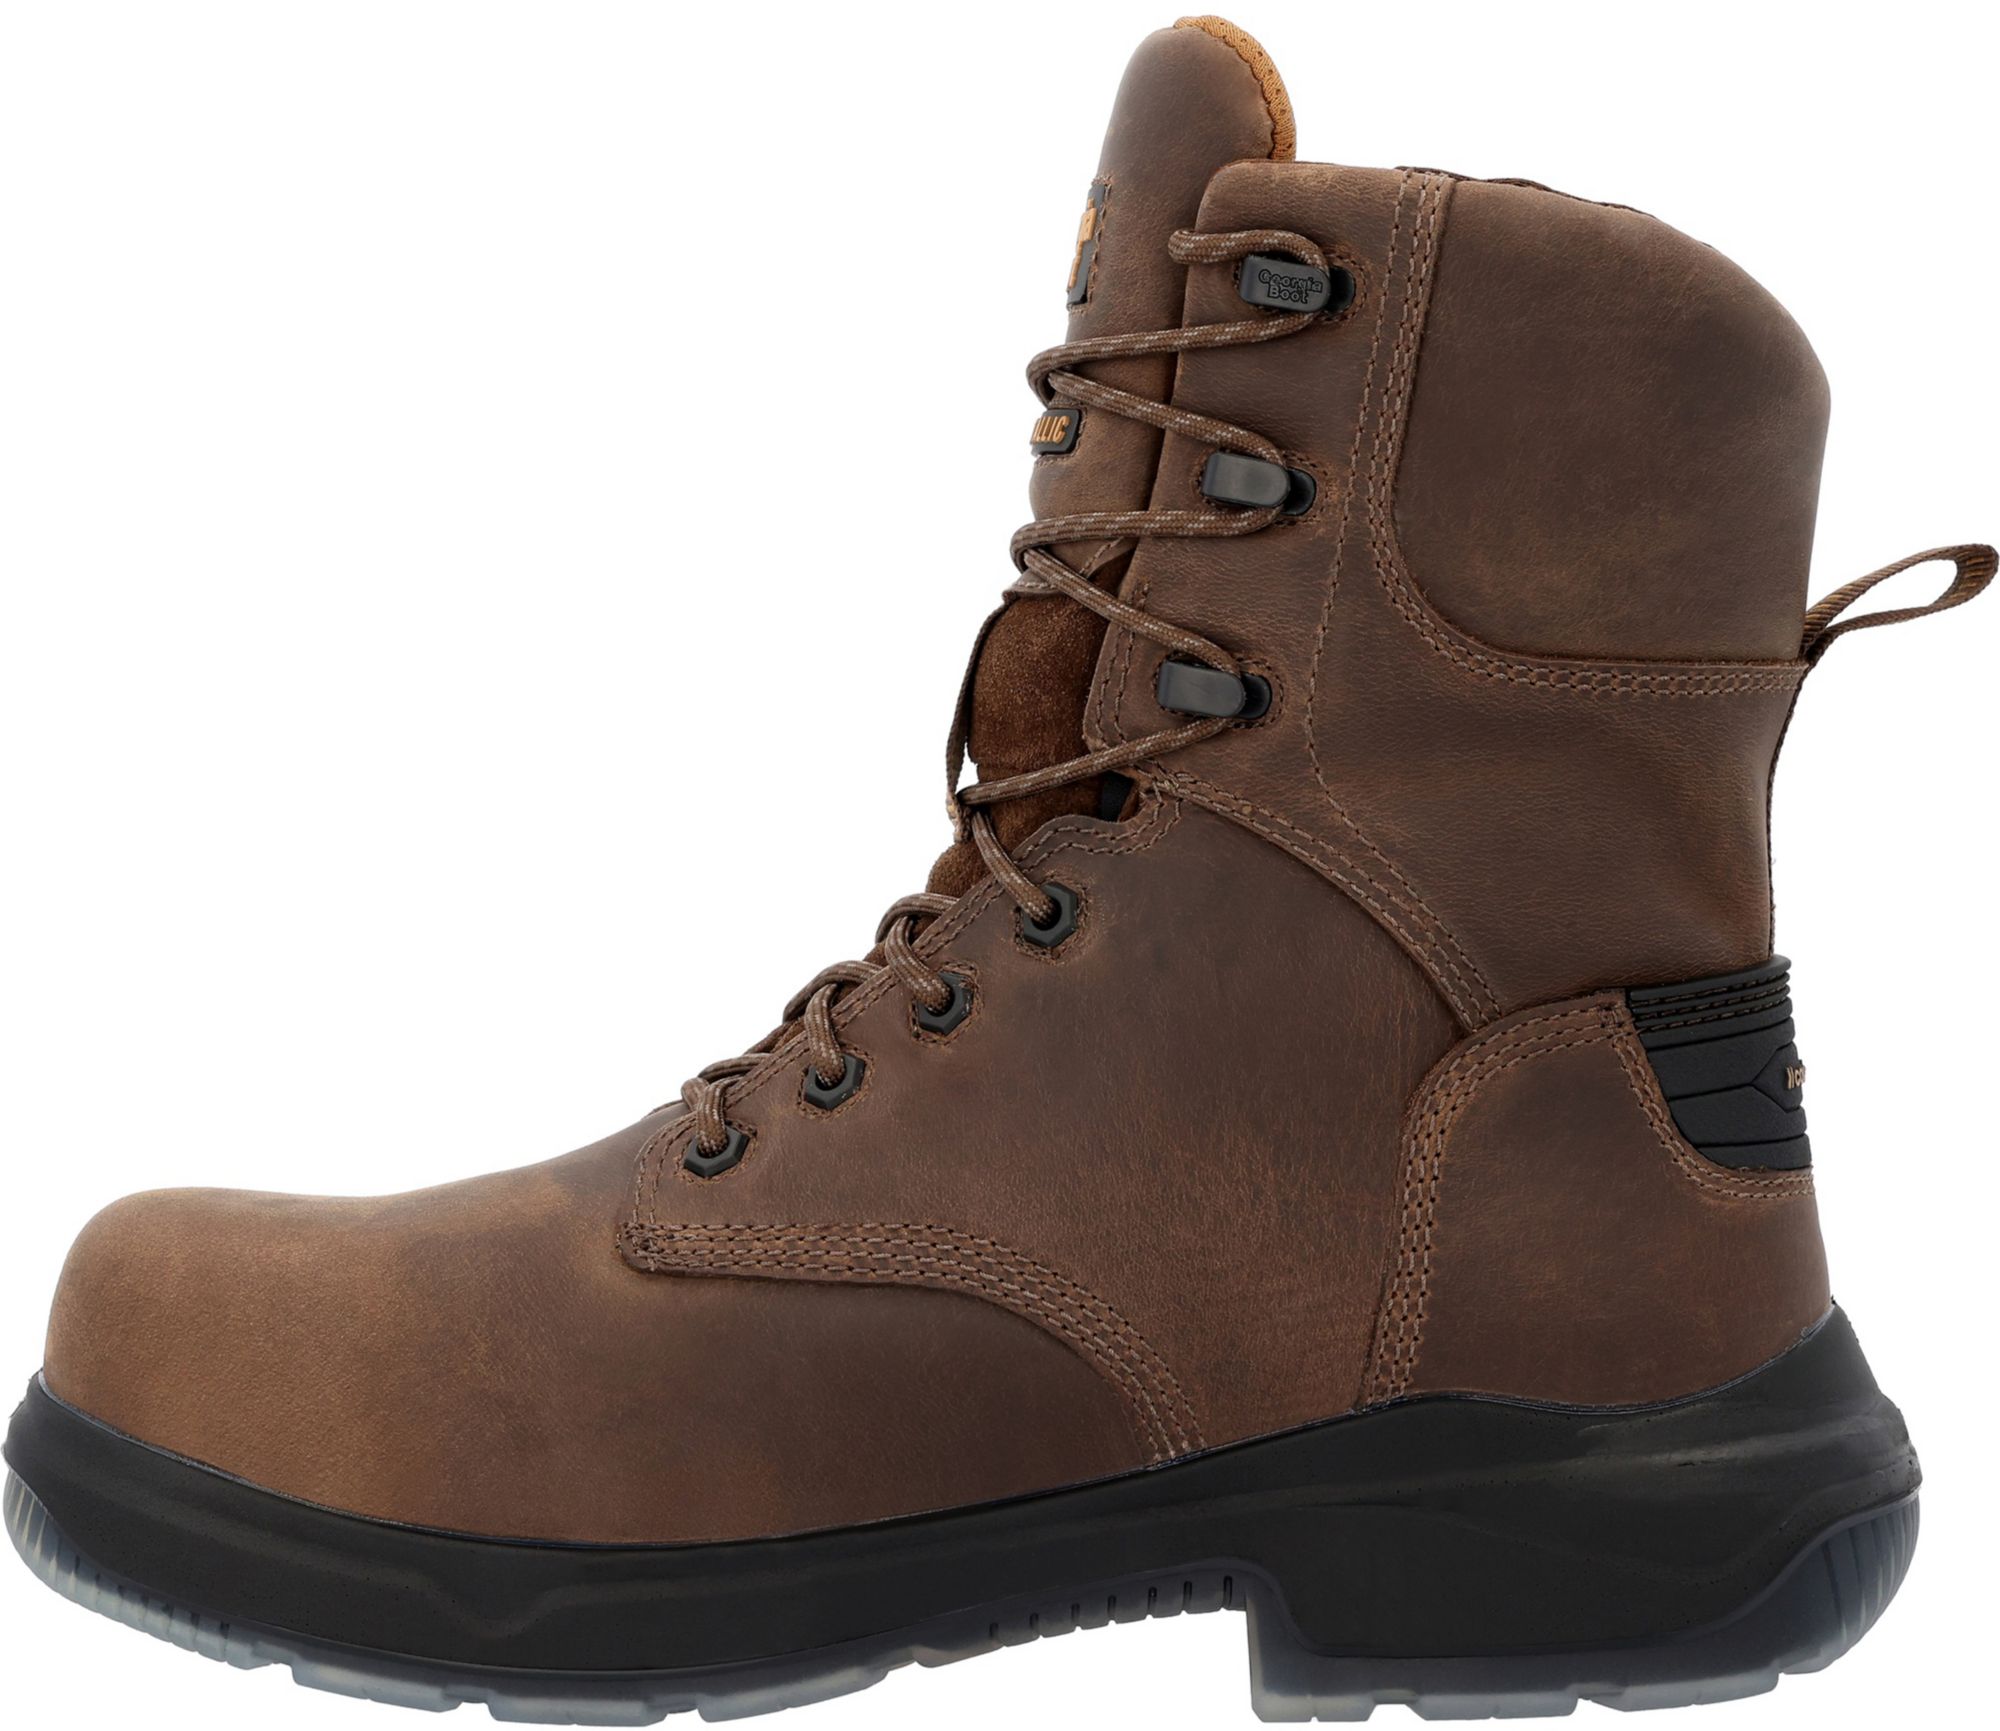 Georgia Boots Men's FLXPoint ULTRA 8" Composite Toe Work Boots